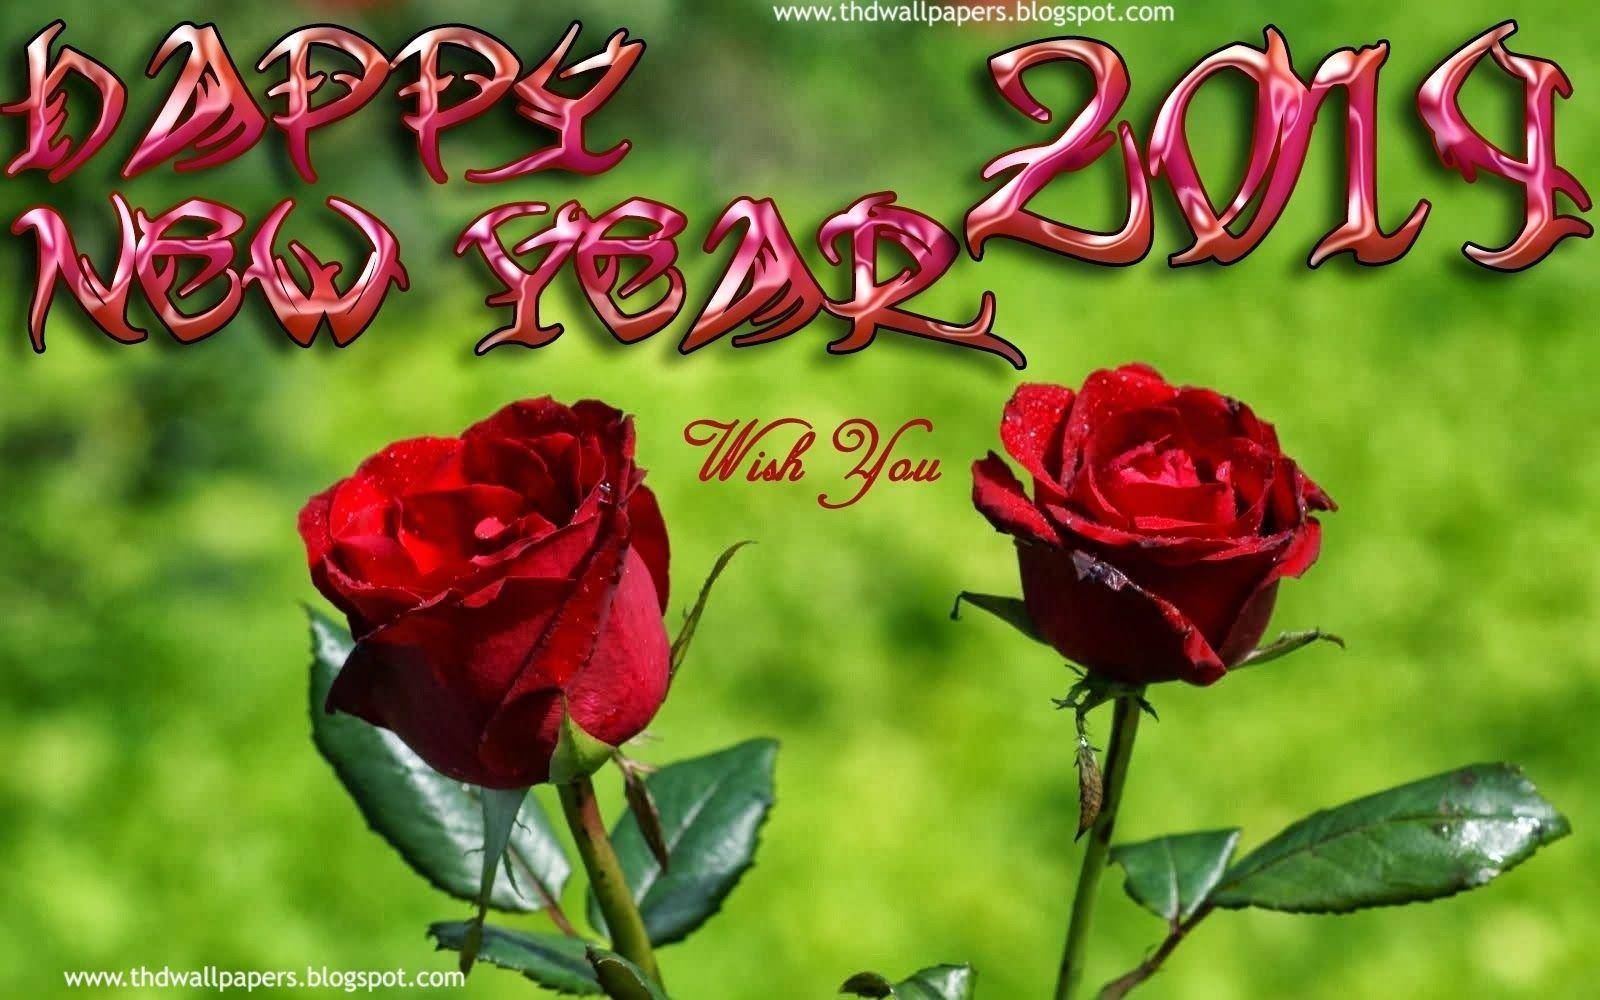 Happy New Year Wishes Greetings Photo Cards Wallpaper 2014